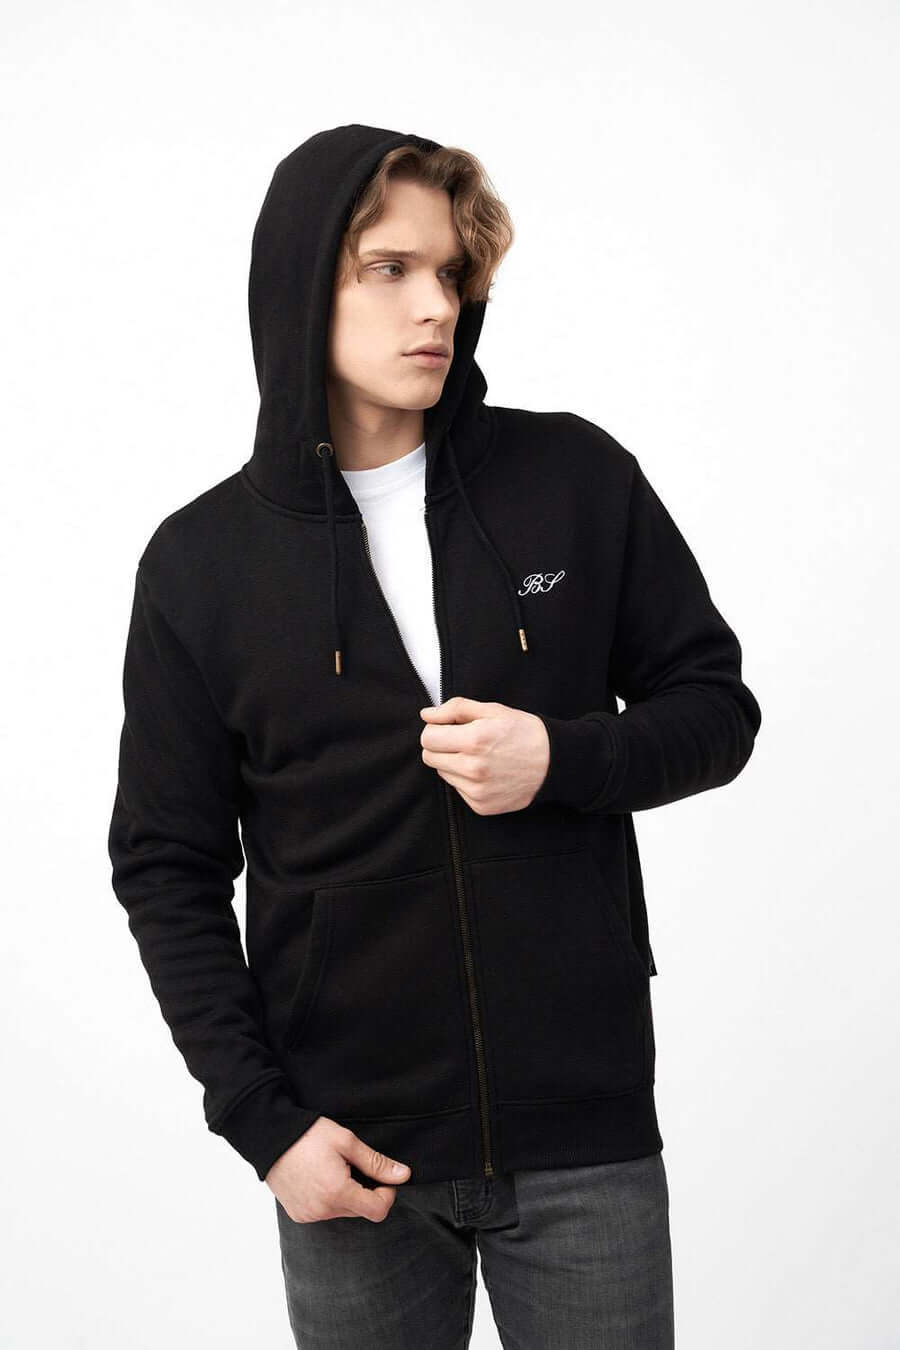 Embroided BS Durable Zipped Men's Hoodie